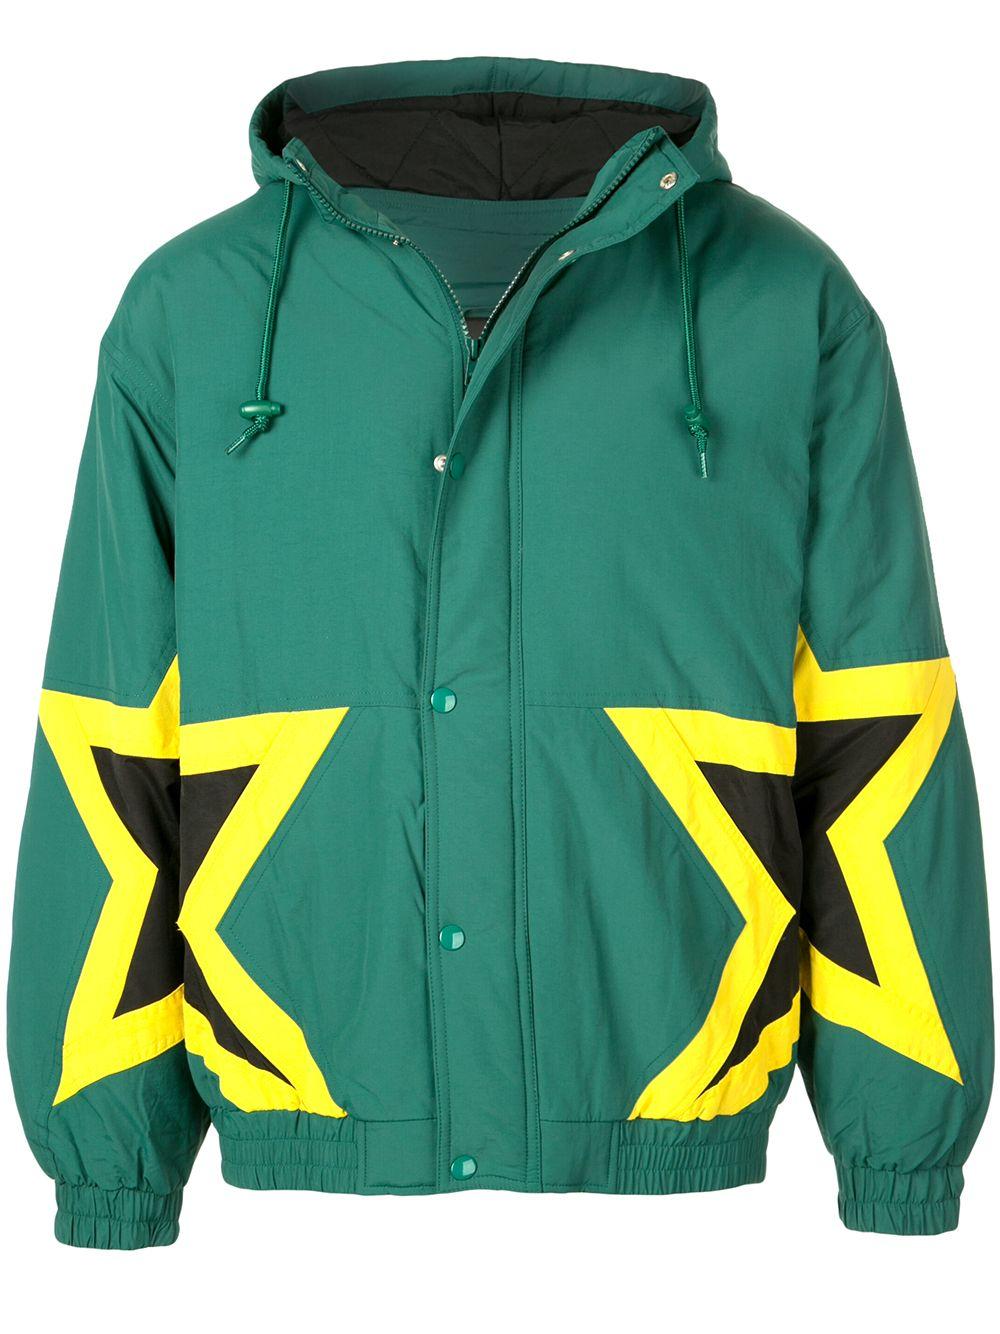 Supreme Stars Puffy Jacket in dk Green (Green) for Men - Save 7% | Lyst